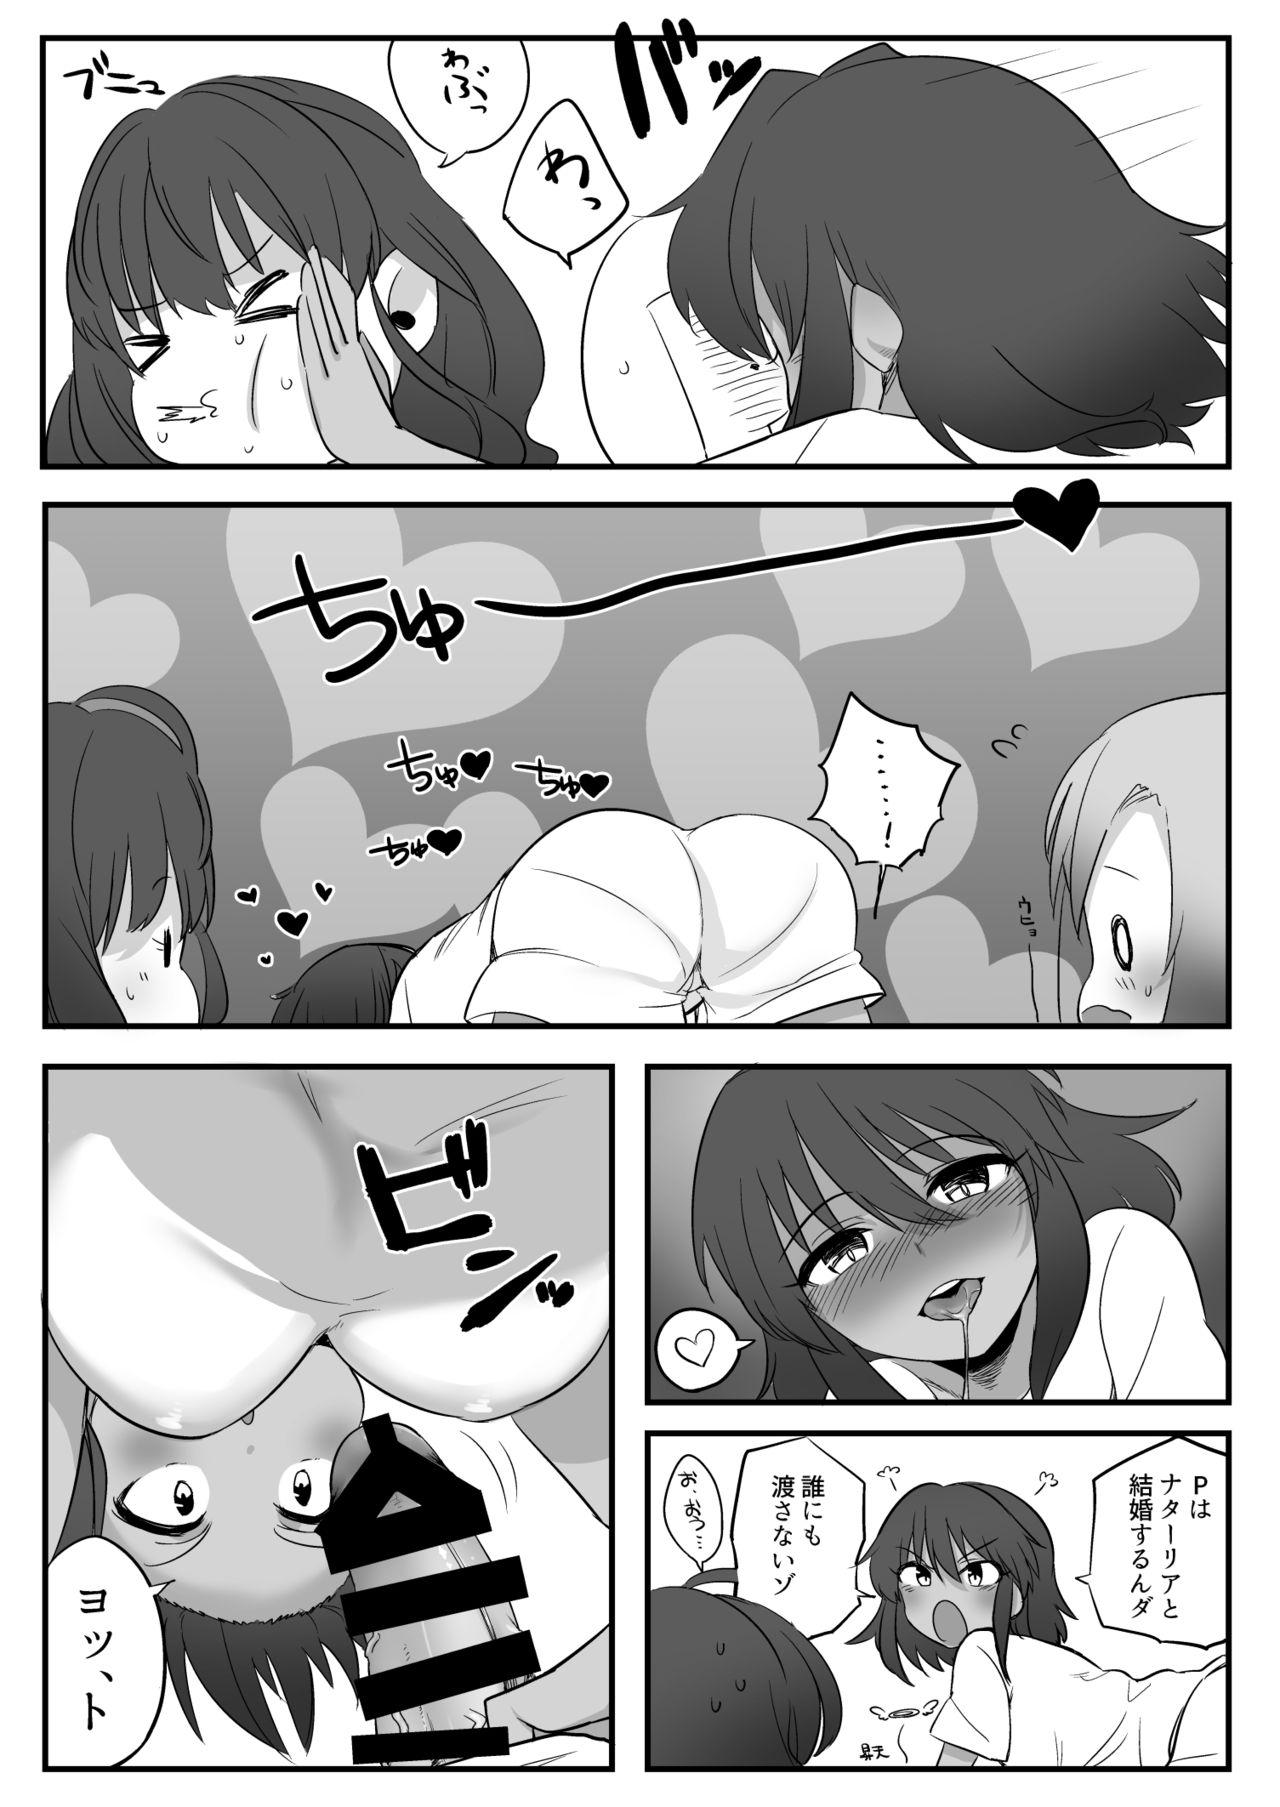 Humiliation Pov 闇のアイプロ本 - The idolmaster Couch - Page 7